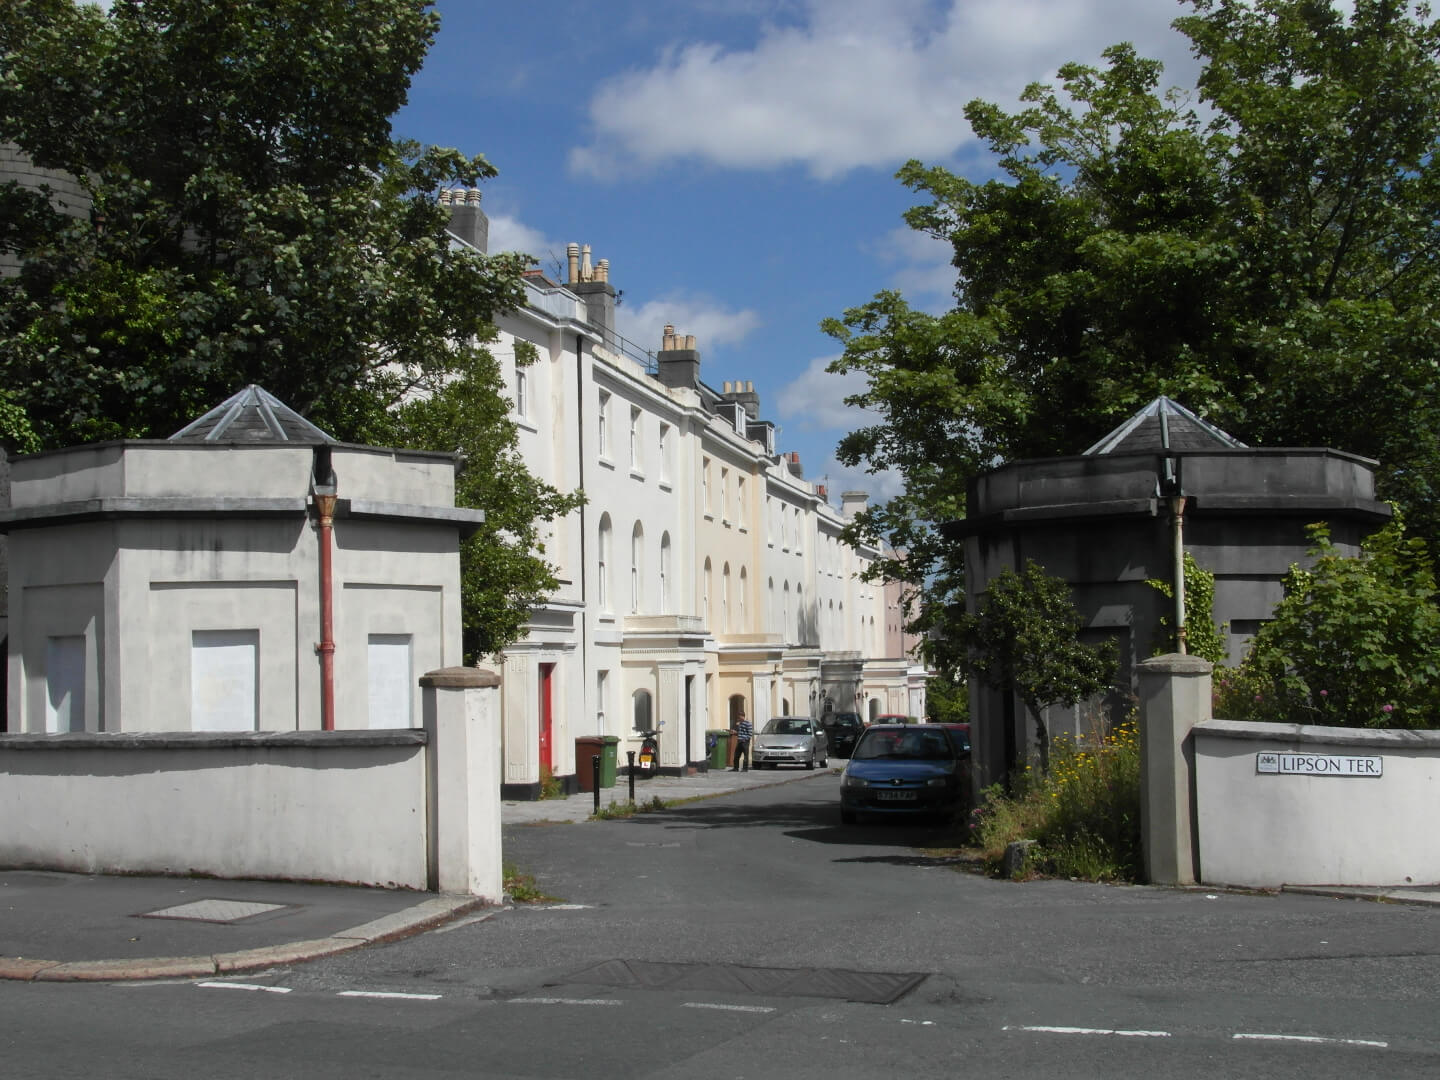 Student Accommodation in Lipson, Plymouth - Lipson Terrace on a sunny day